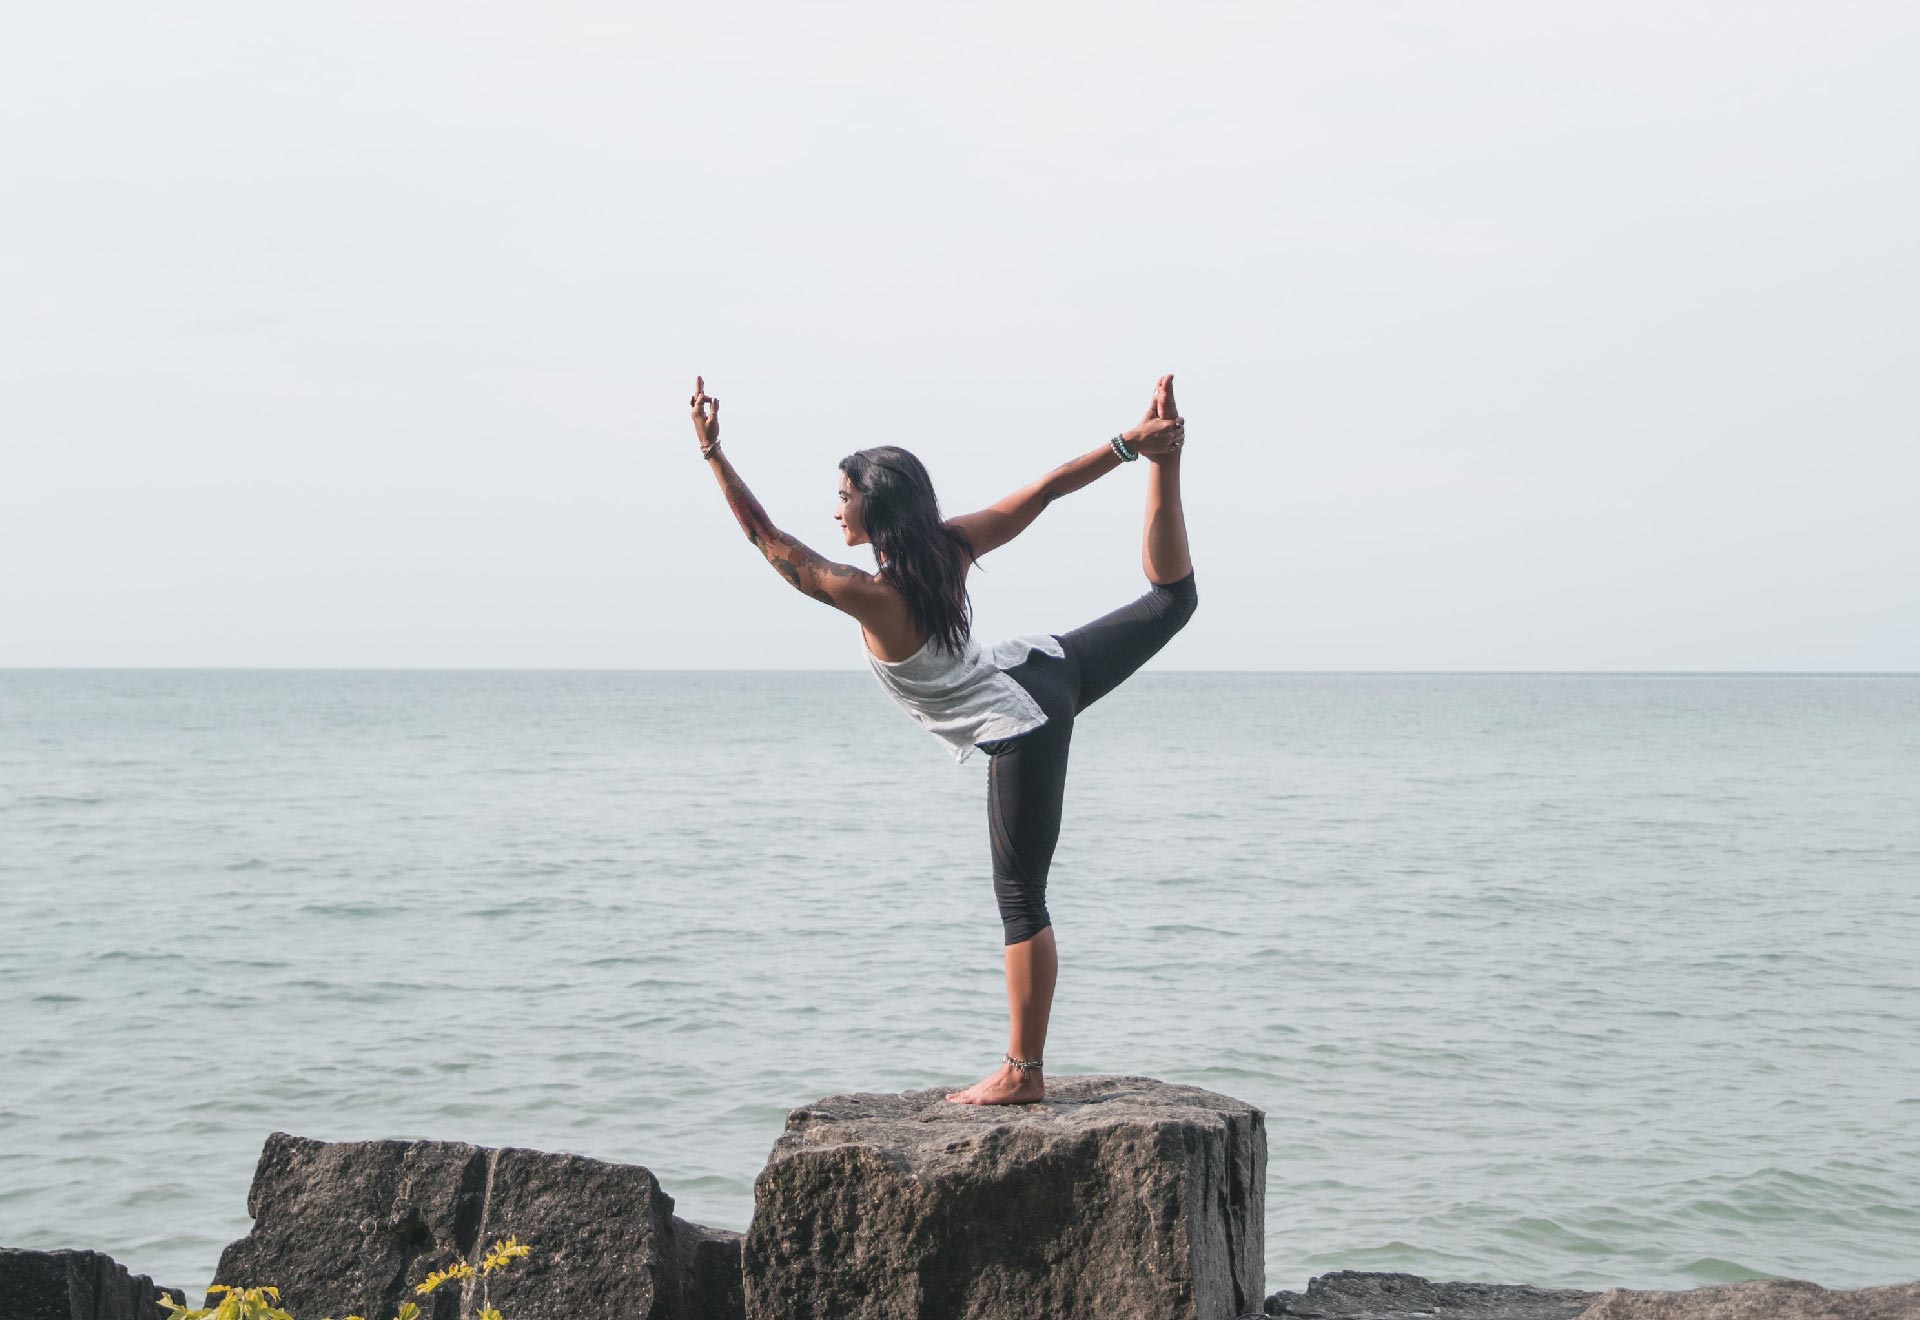 Woman balancing on a rock in a yoga pose near the ocean.